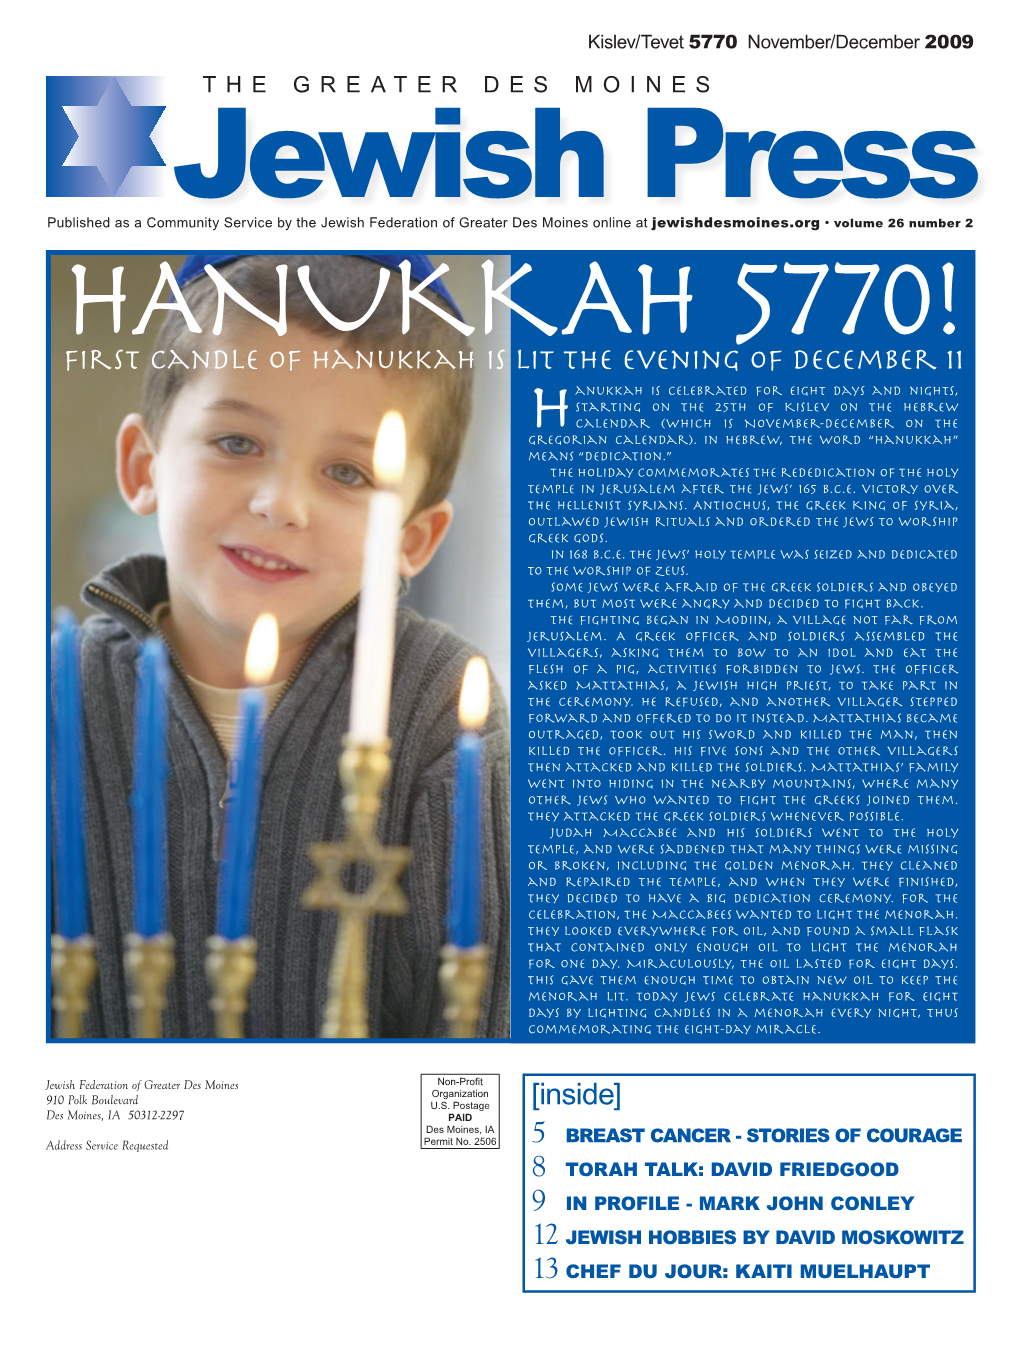 [Inside] First Candle of Hanukkah Is Lit the Evening of December 11